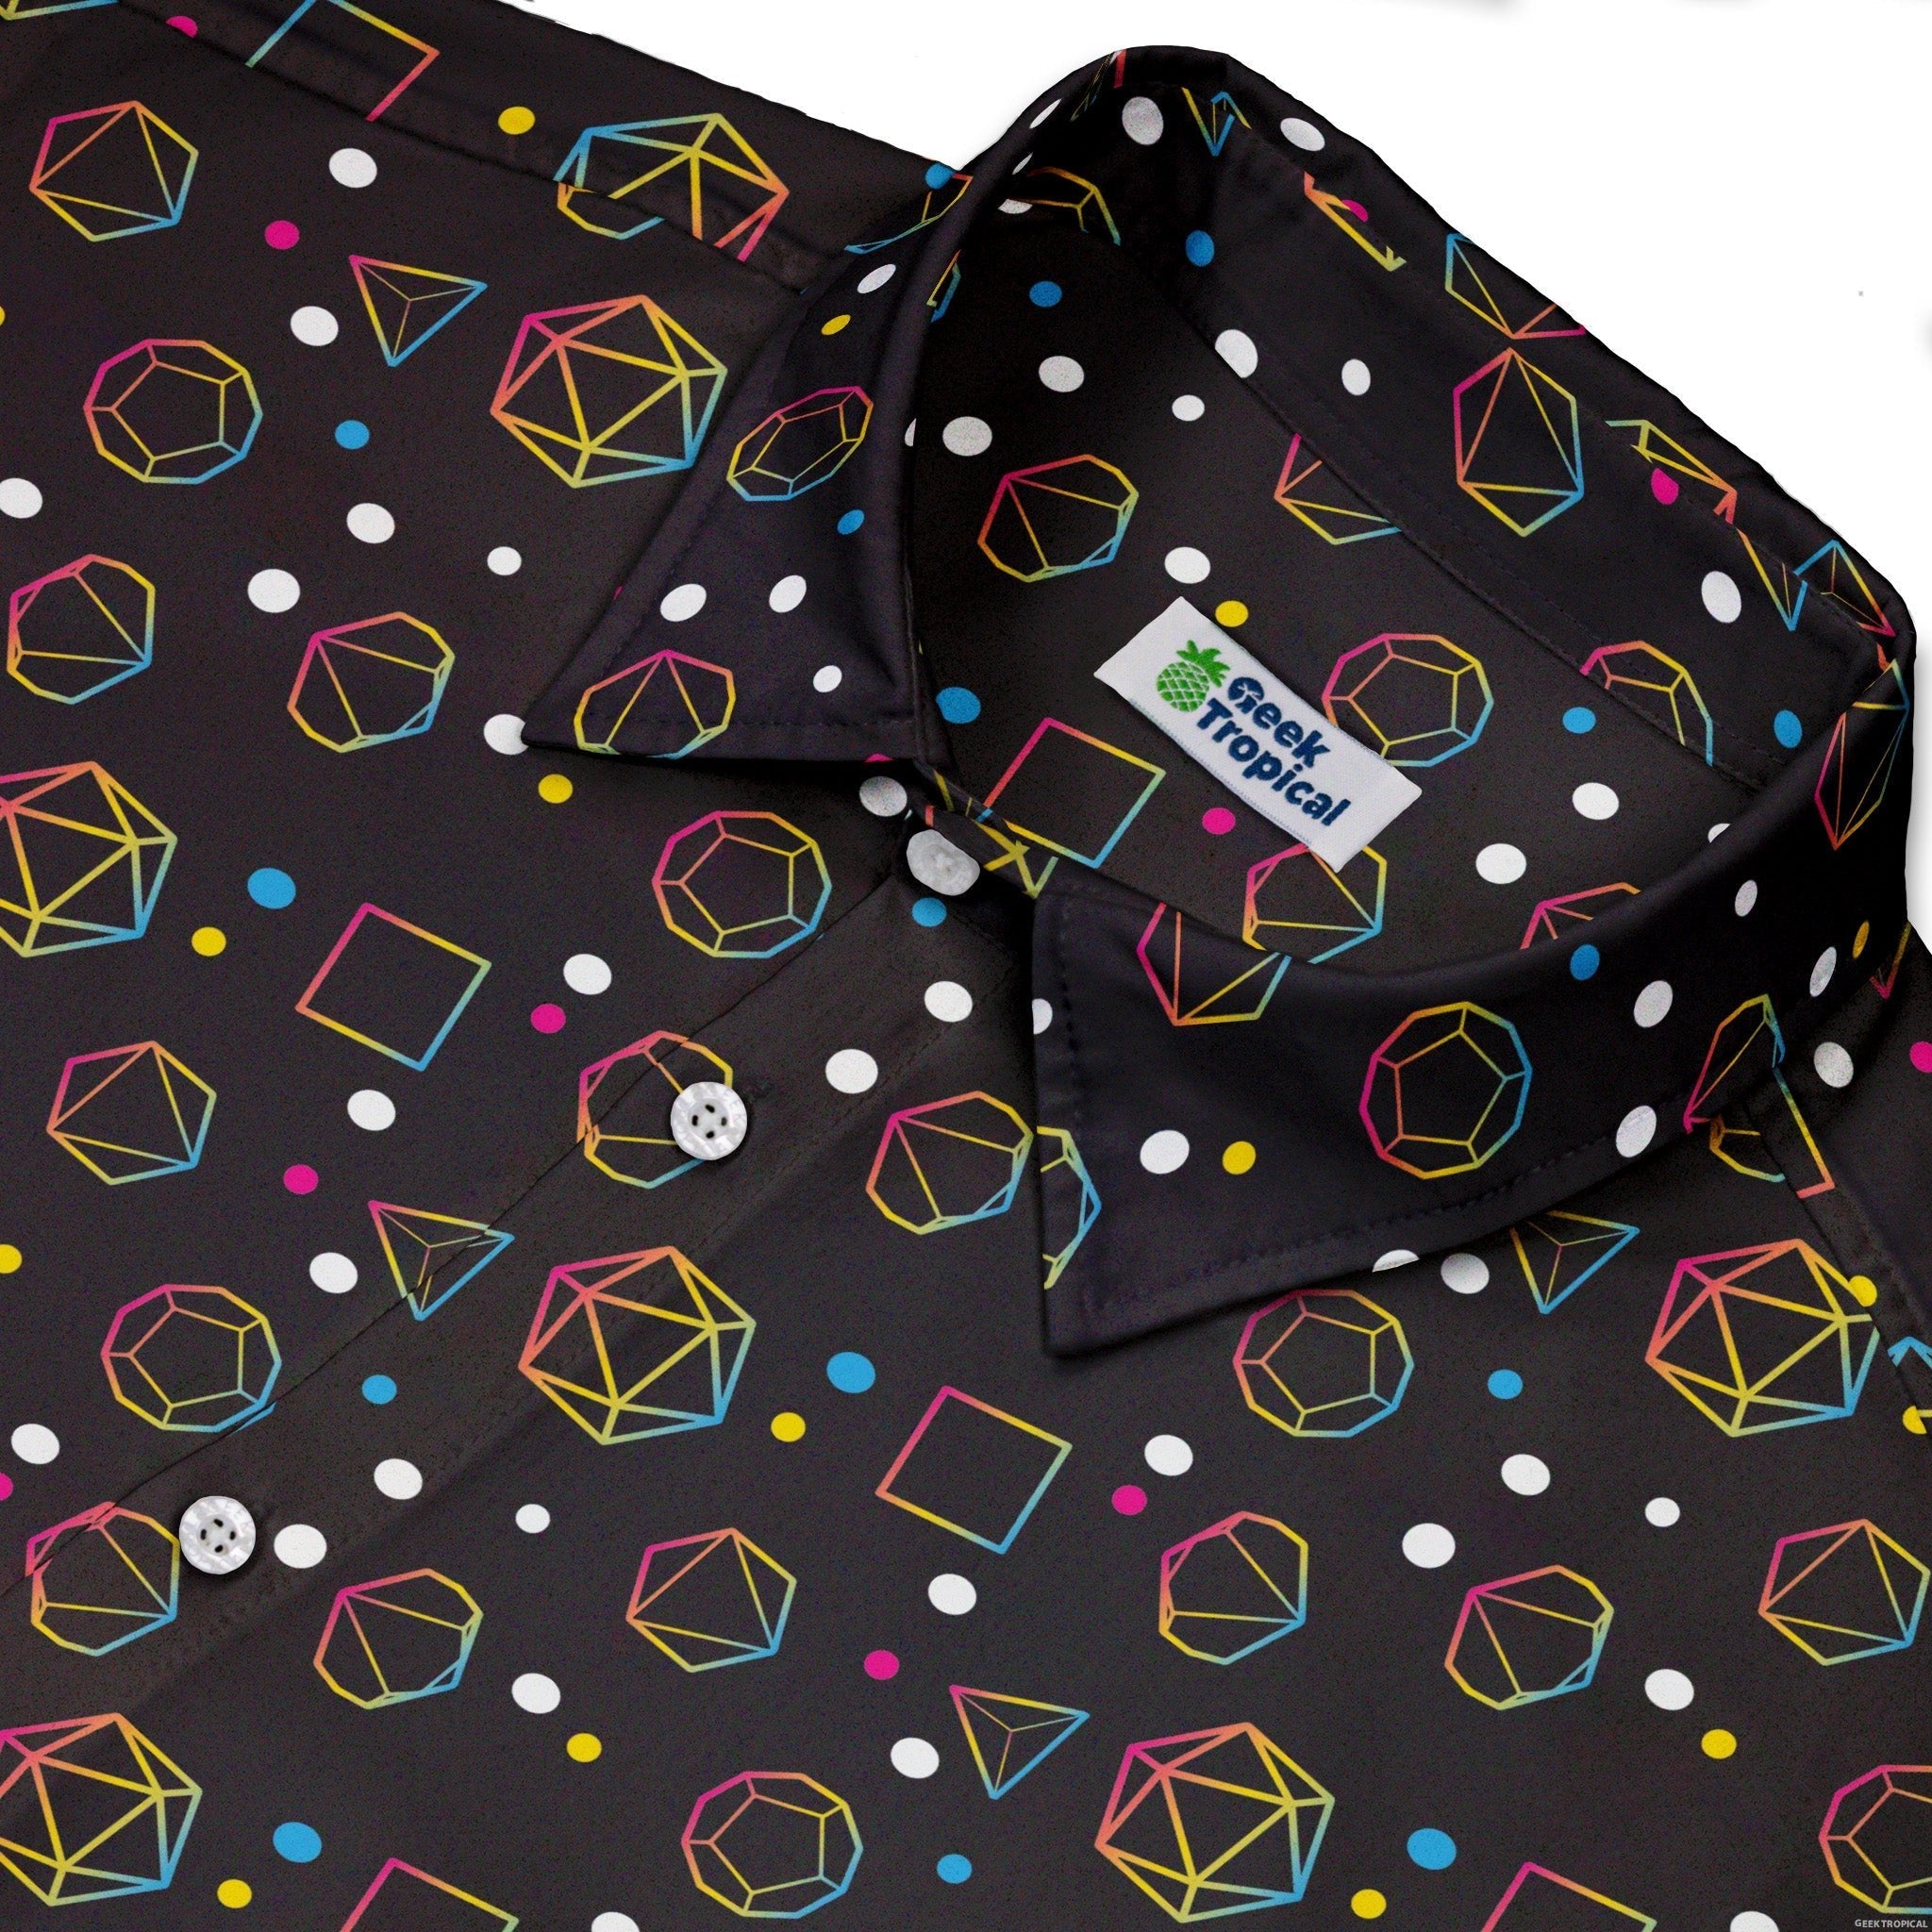 Pansexual Pride Flag DND Dice Button Up Shirt - adult sizing - Design by Heather Davenport - dnd & rpg print